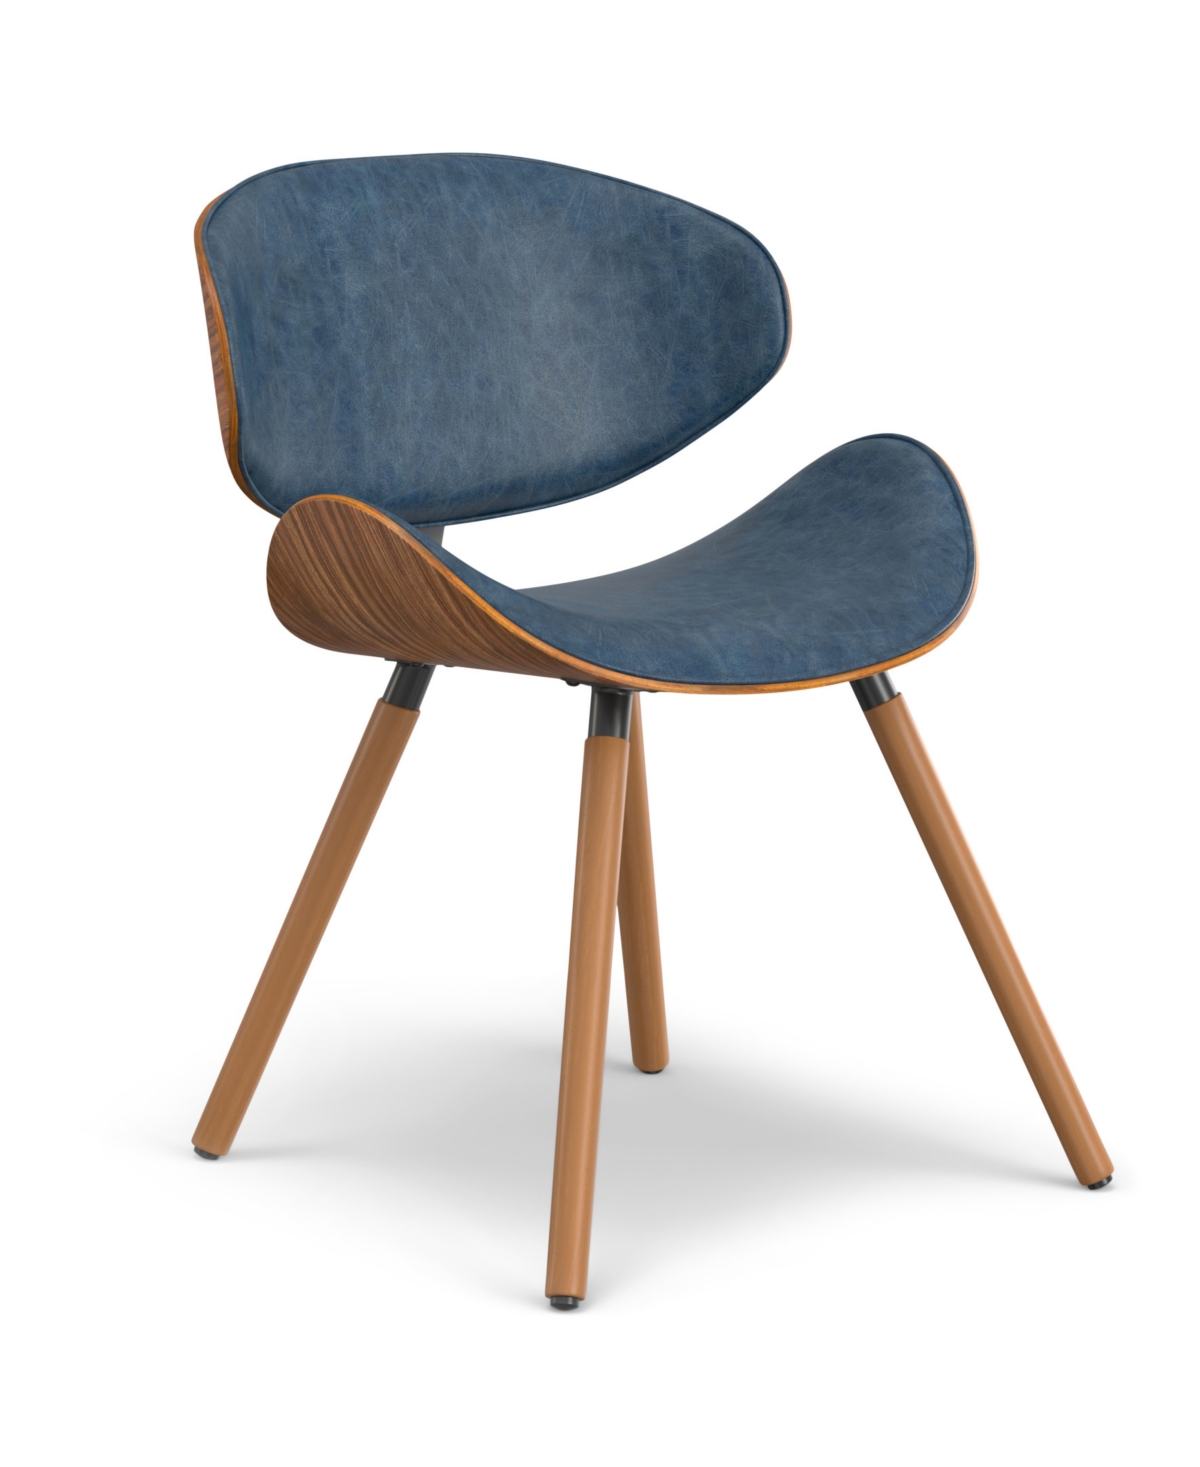 Shop Simpli Home Marana Dining Chair In Distressed Blue Pu Leather